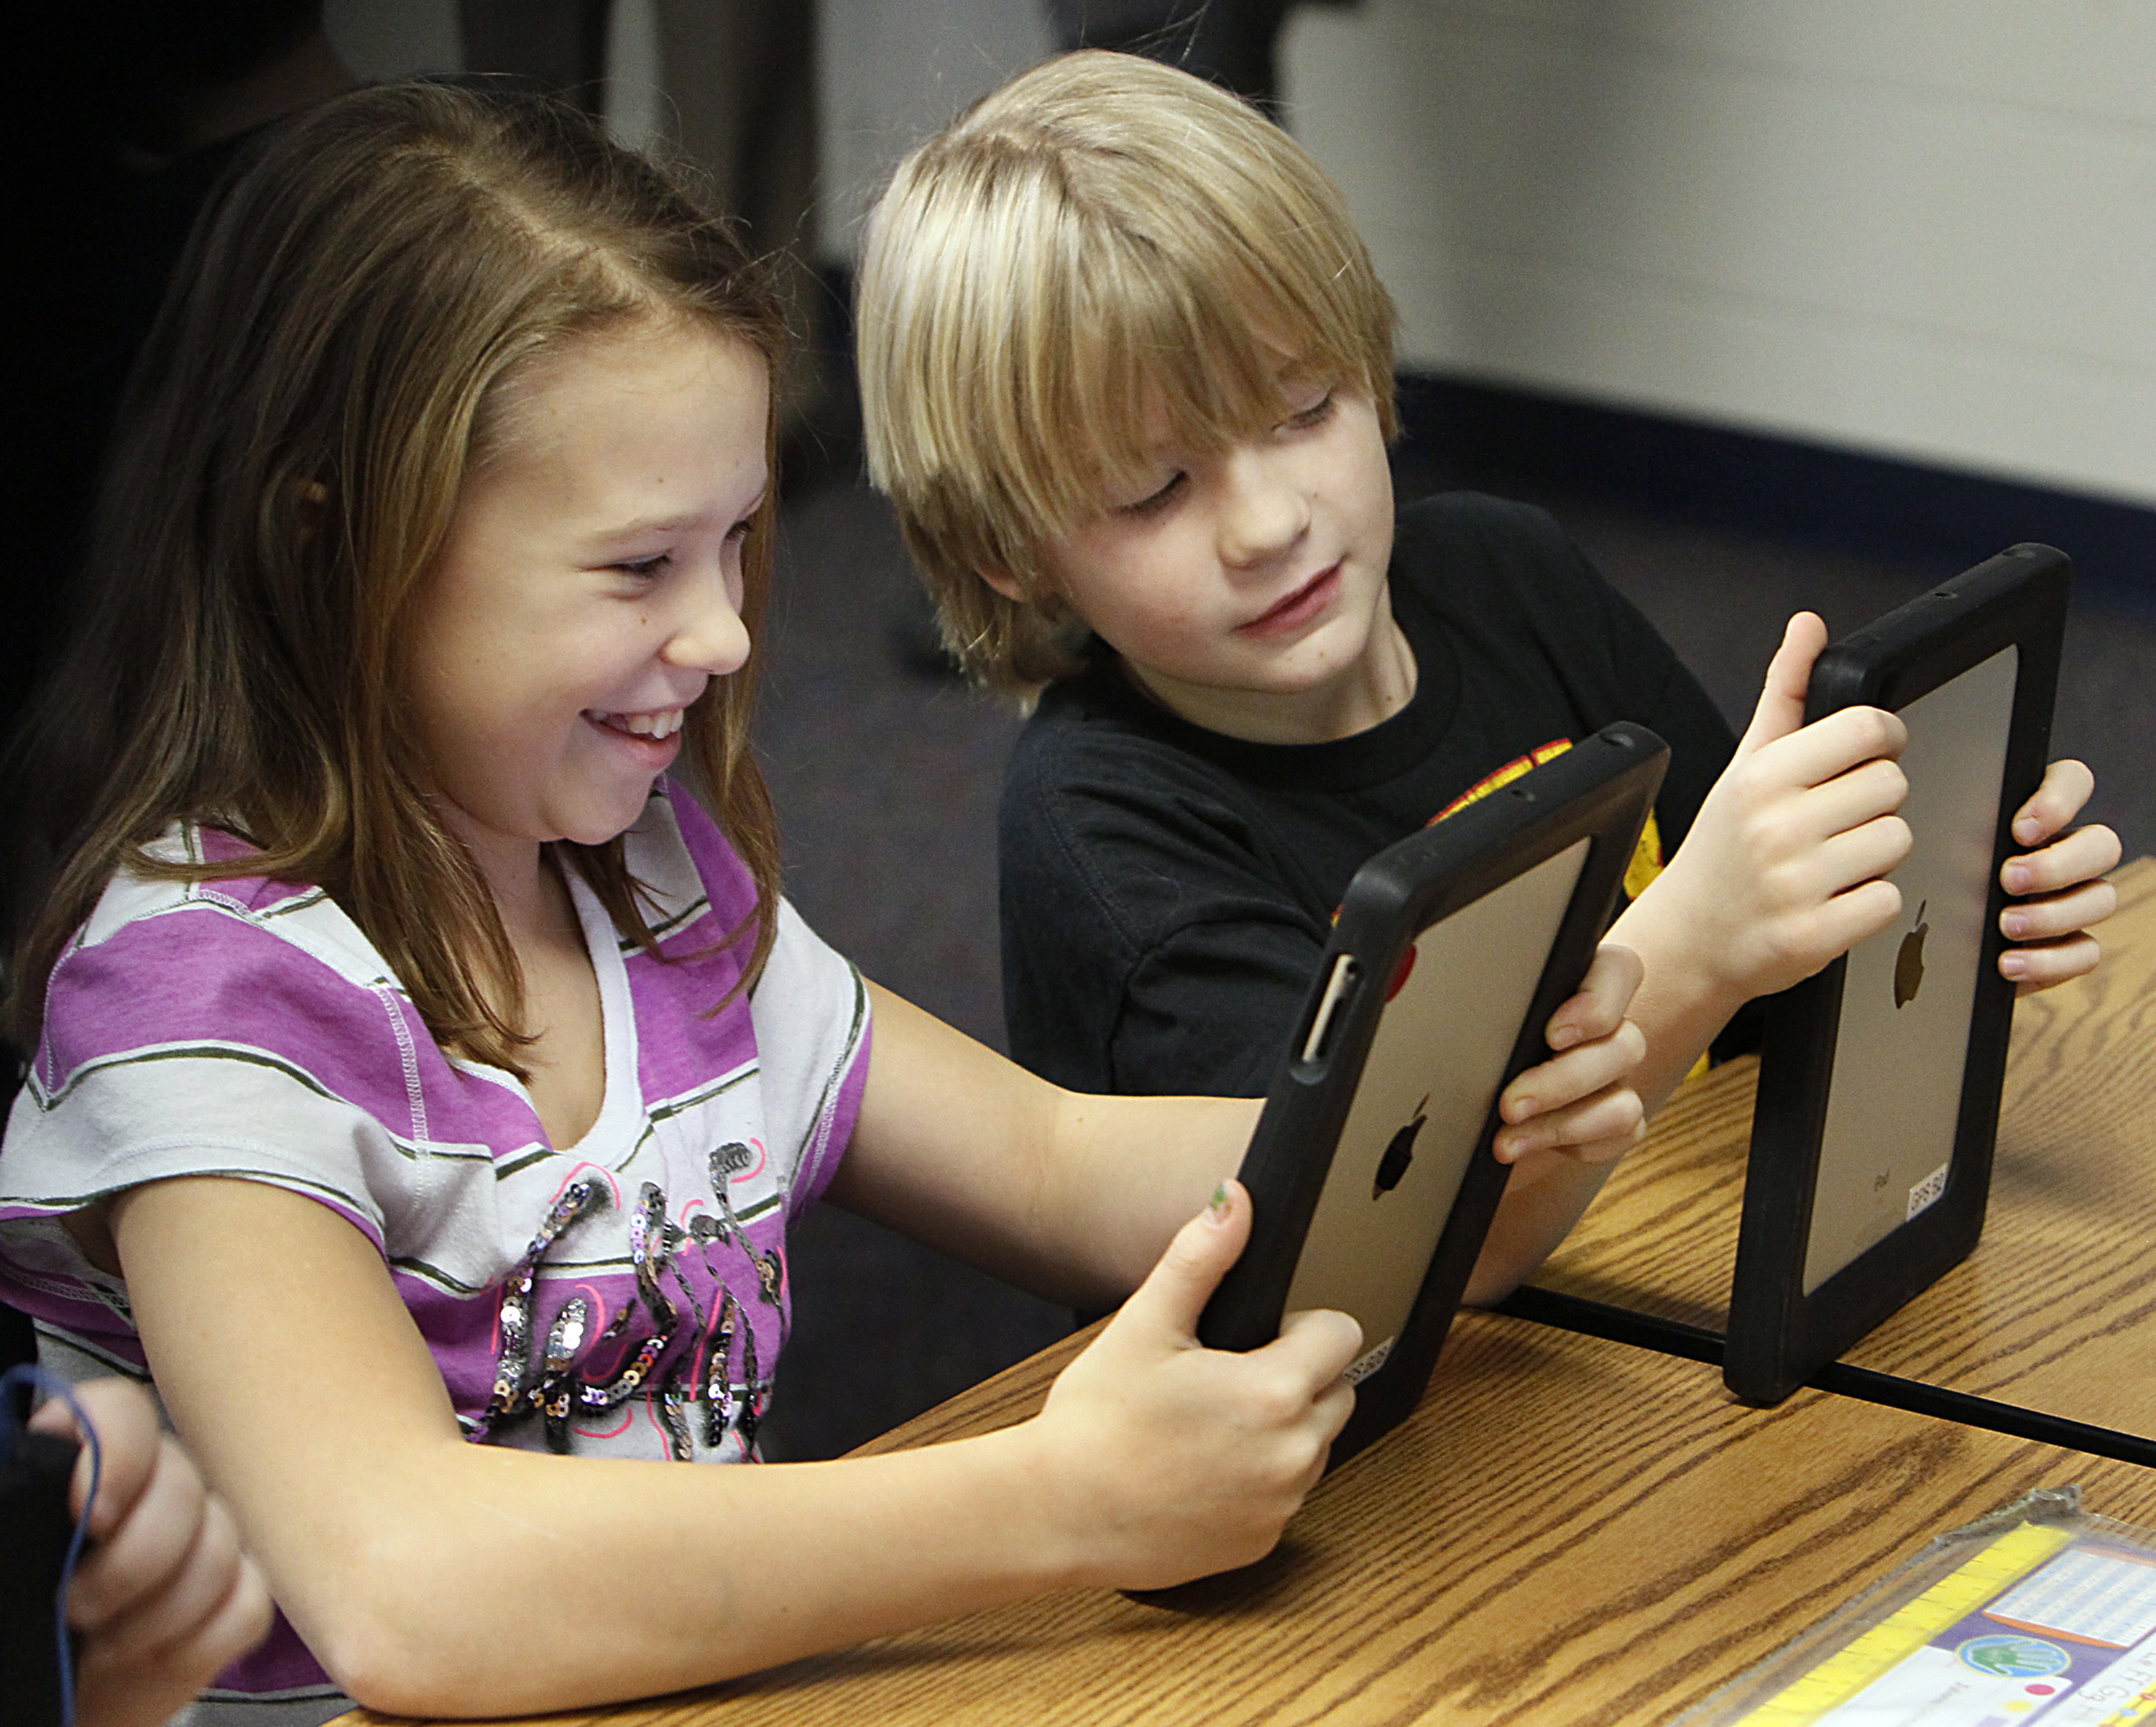 What does research really say about iPads in the classroom?